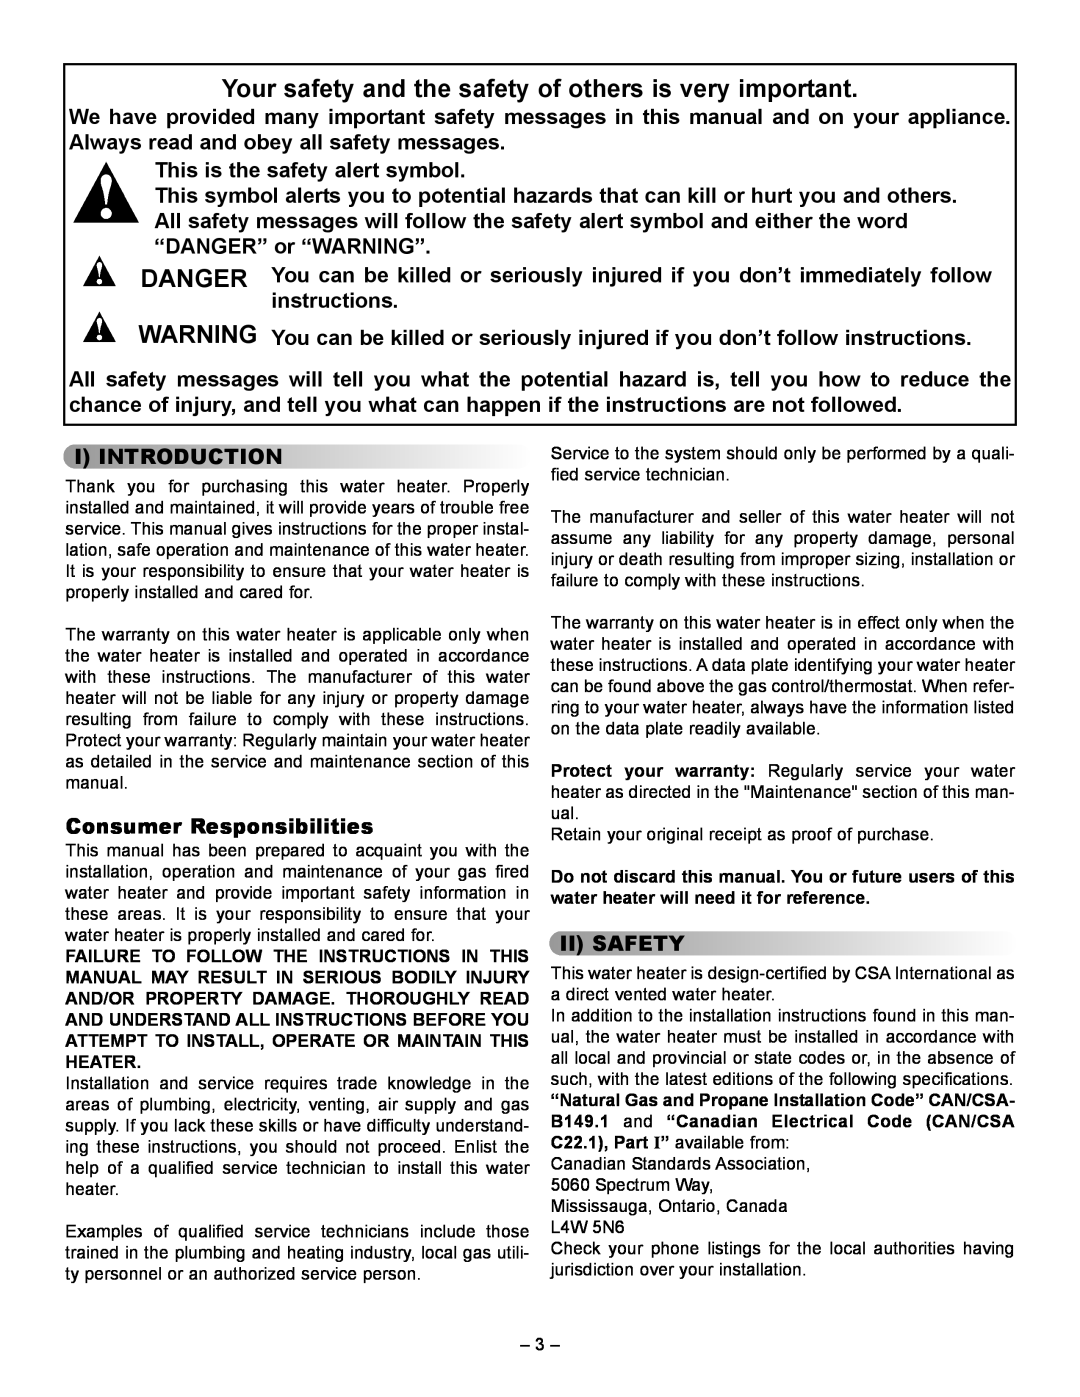 GSW 61009 REV. C (09-03) manual This is the safety alert symbol, I Introduction, Consumer Responsibilities, Ii Safety 